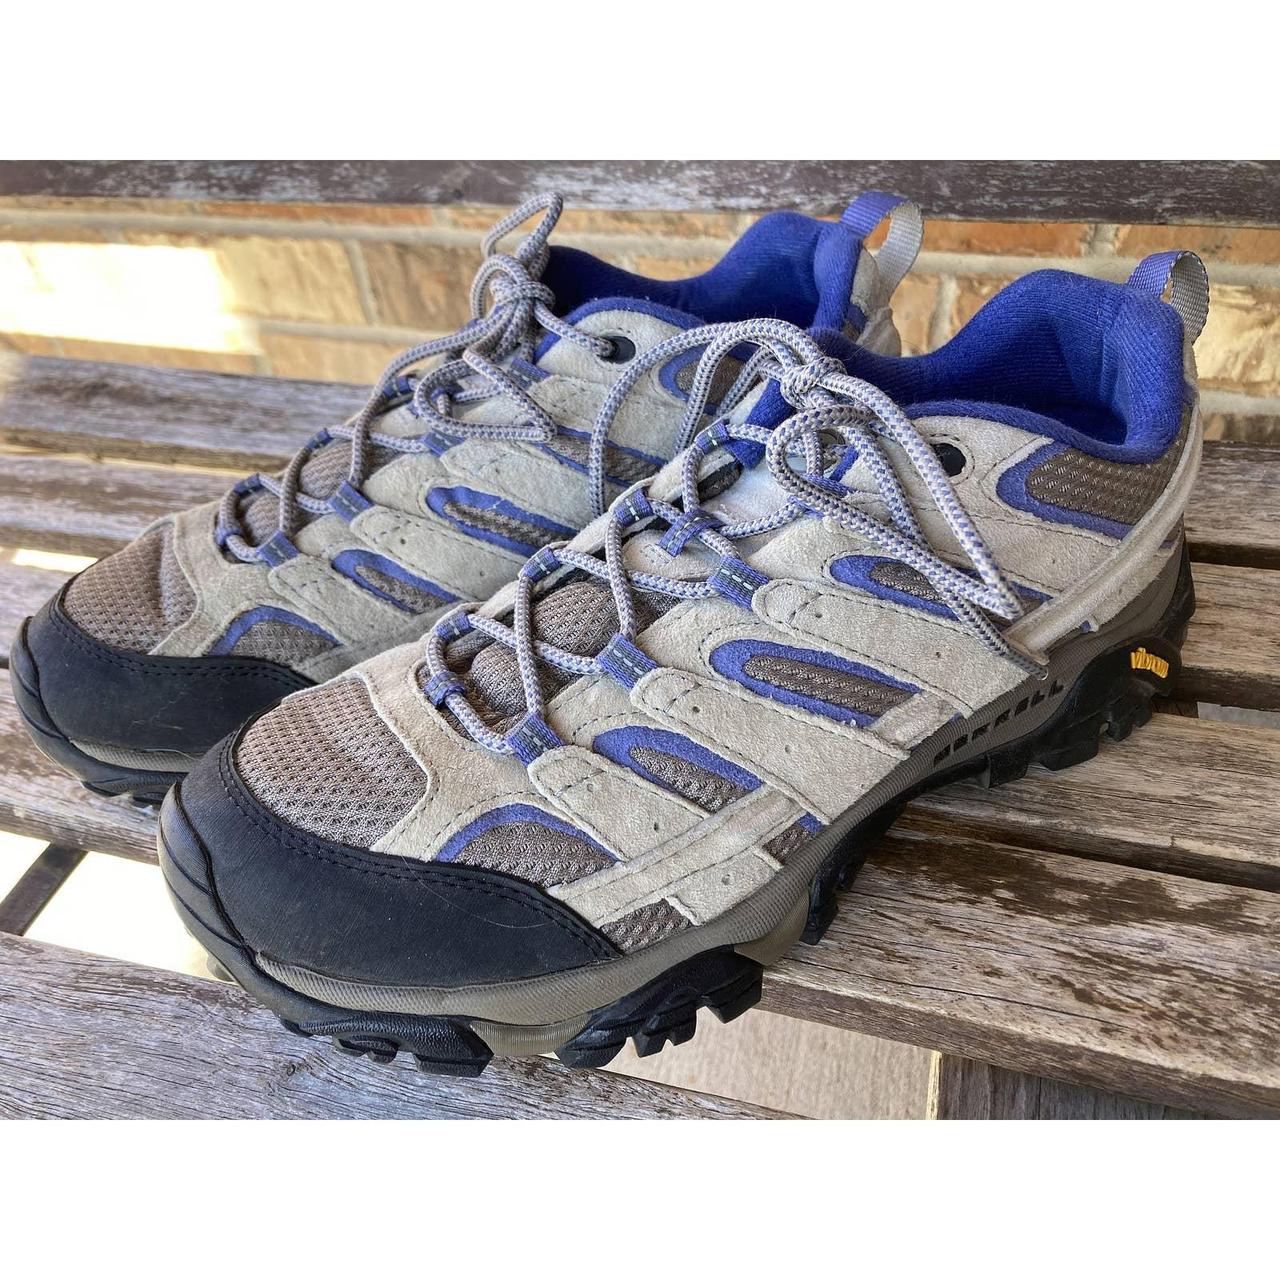 This item sold ! Size 11 Women's Merrell Moab 2... - Depop